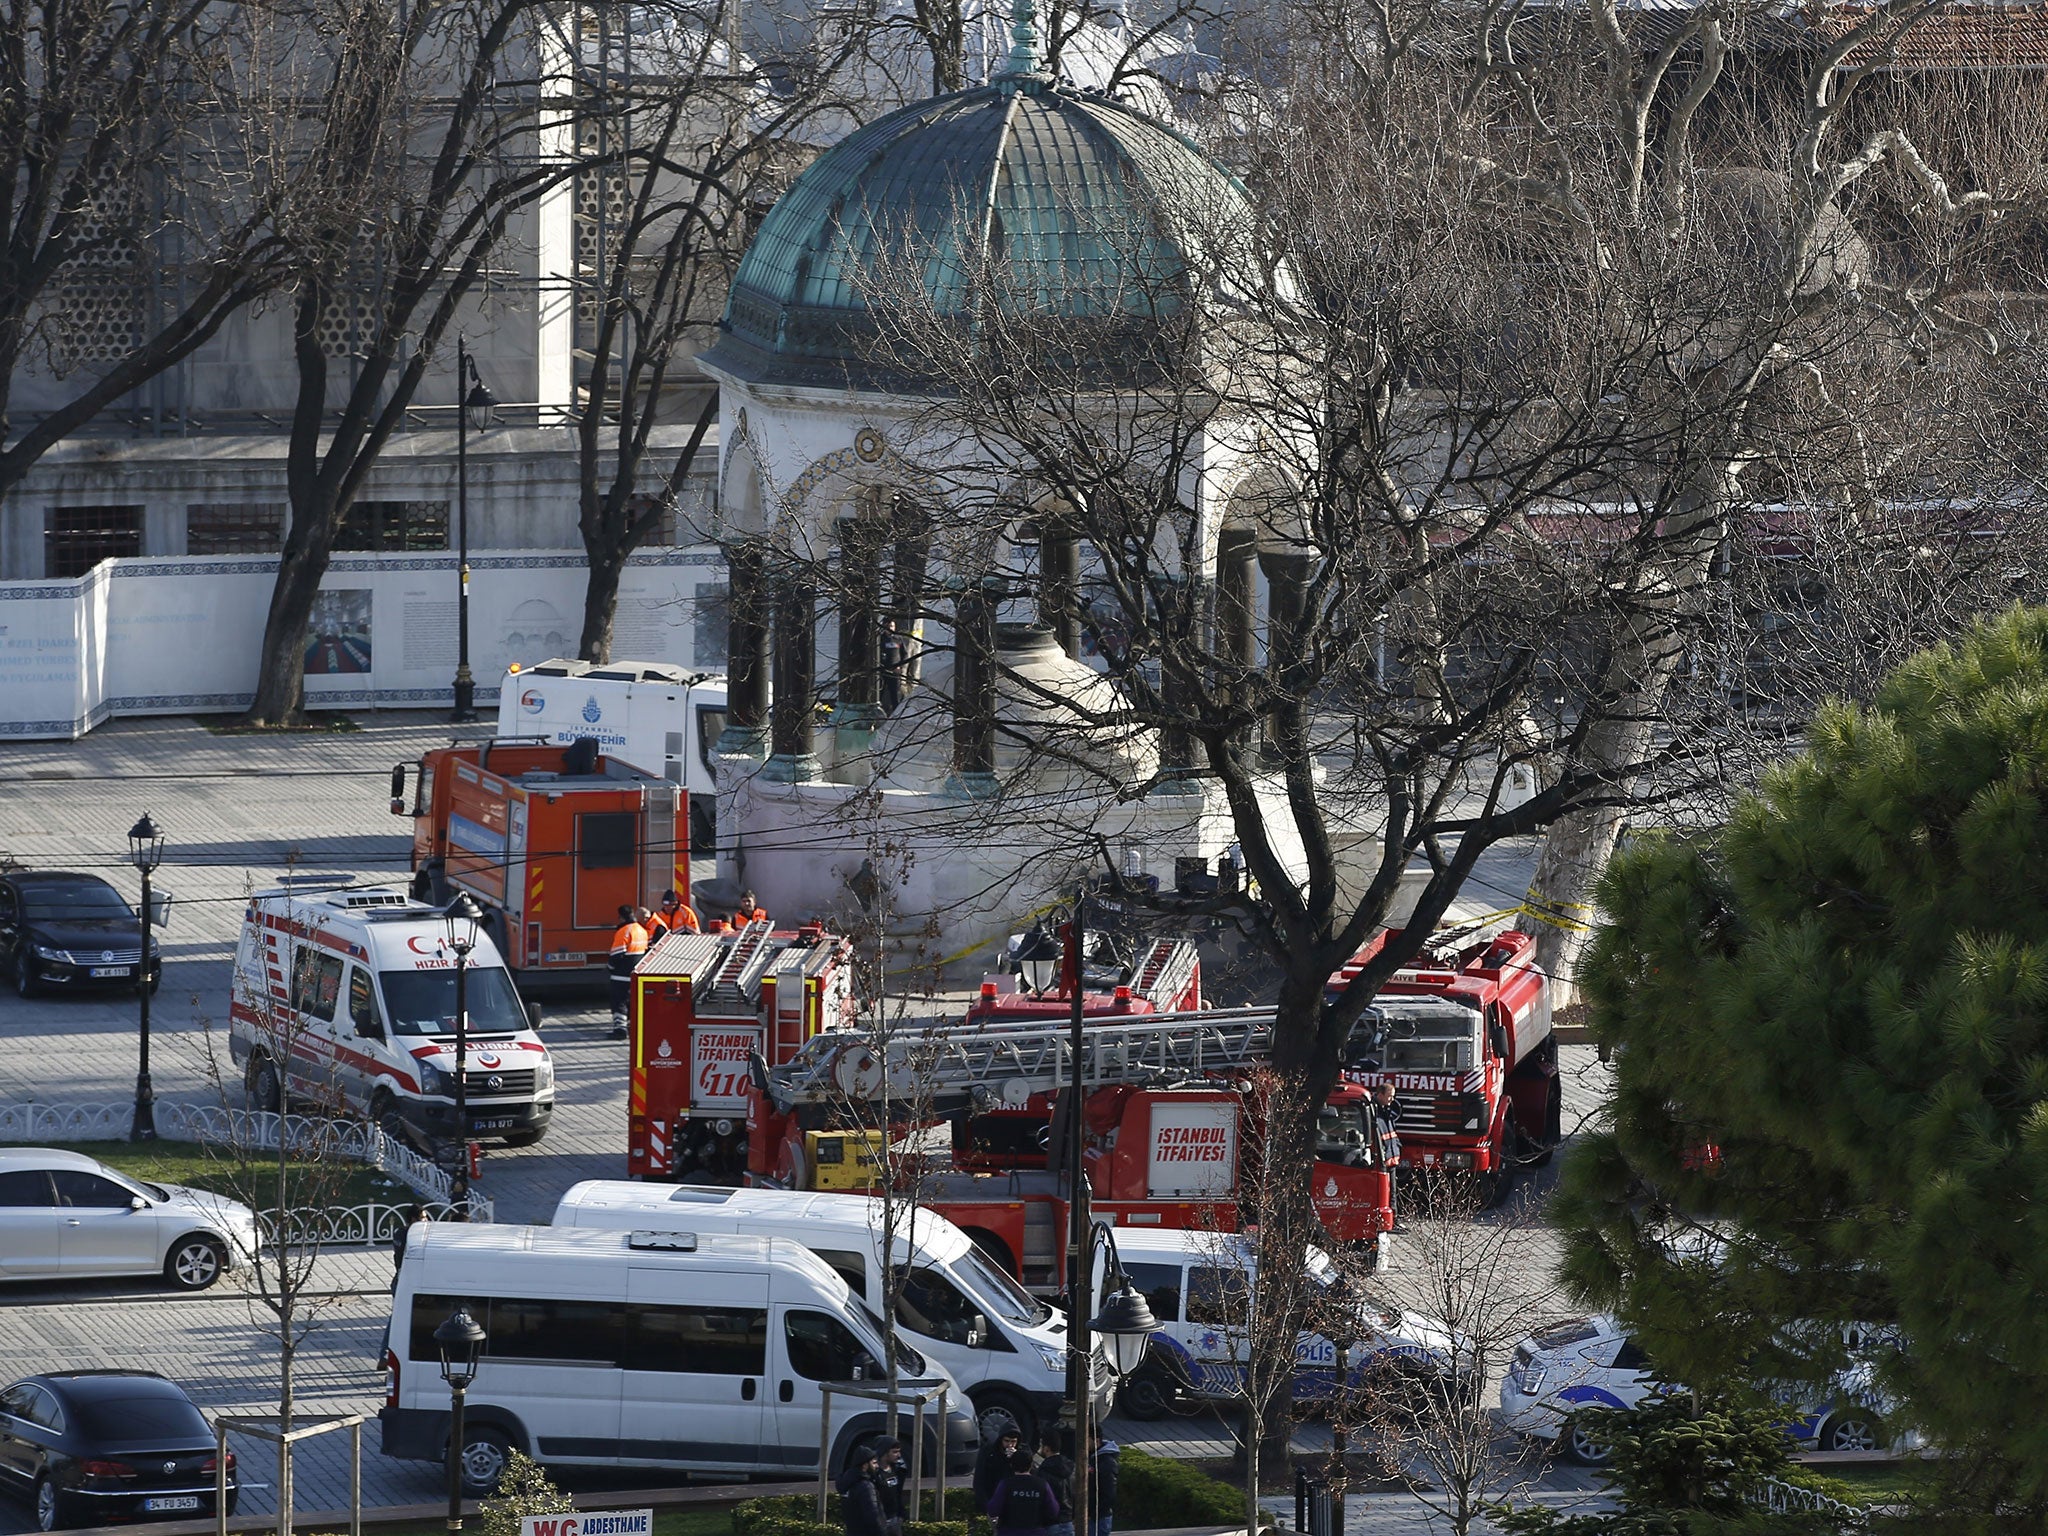 The Foreign Office says there is a high threat of terrorism in Turkey